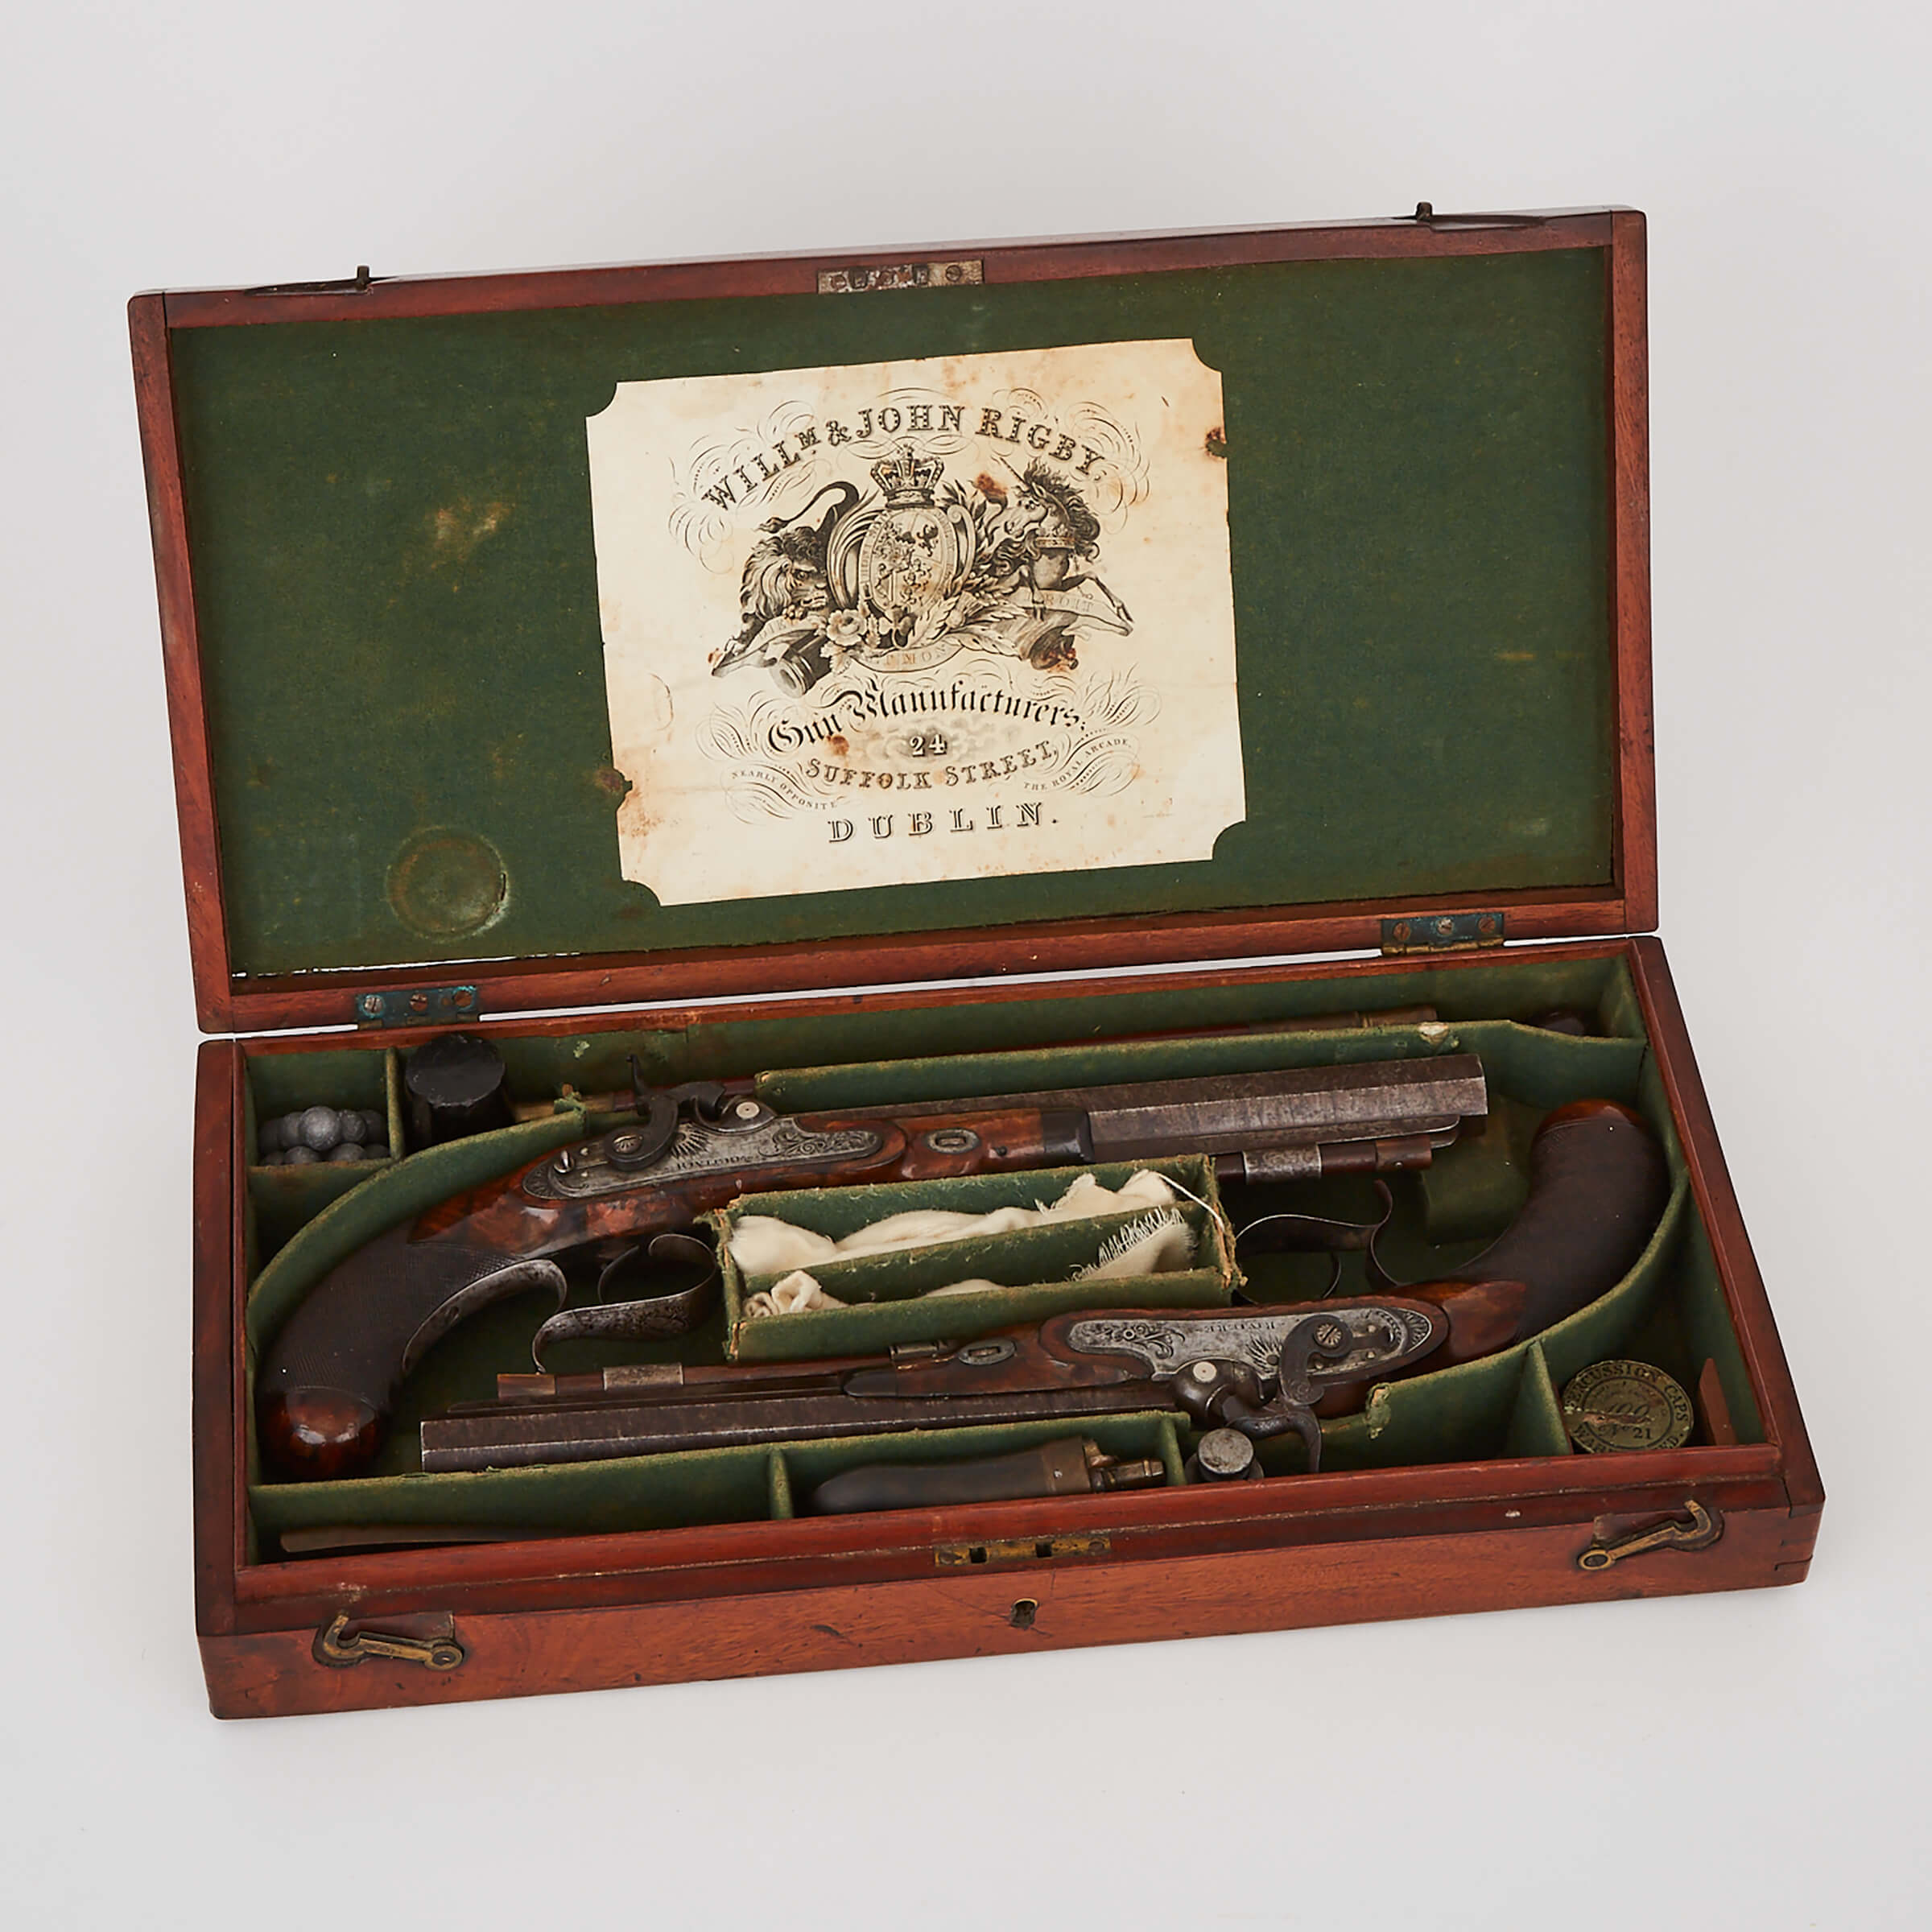 Cased Pair of 32-Bore Percussion Lock Dueling Pistols, Riviere, London, early 19th century